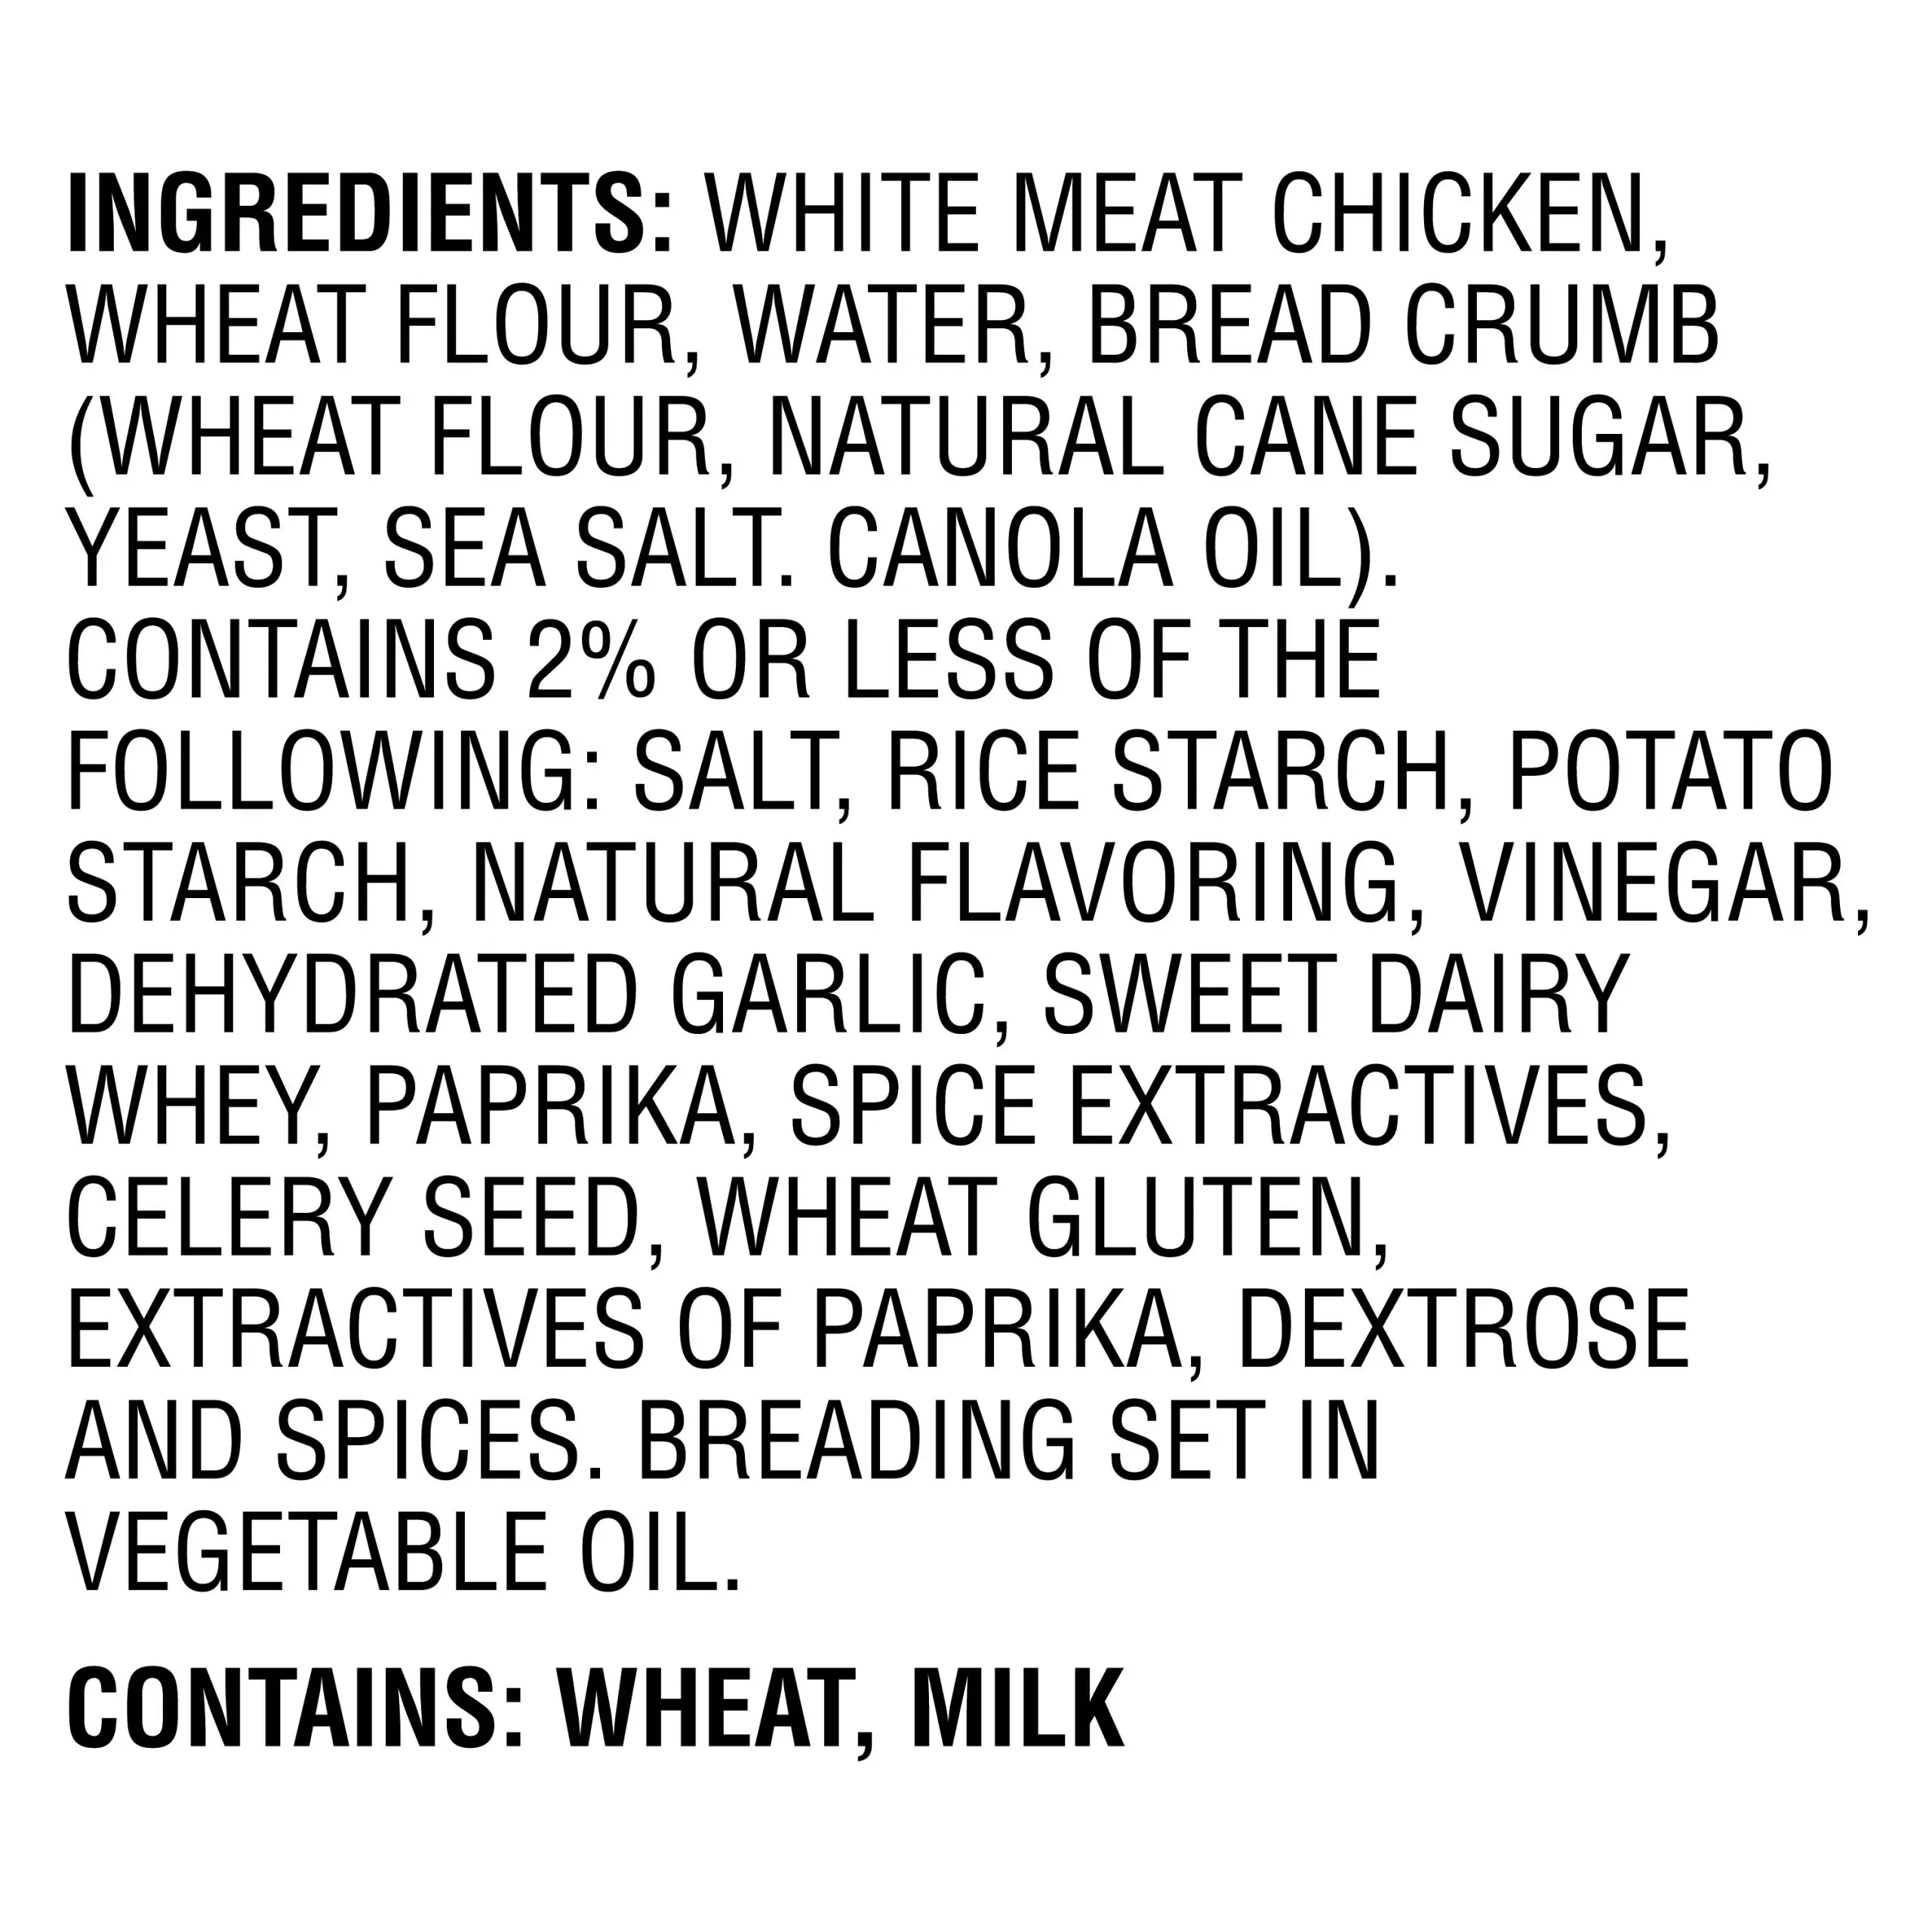 Ingredients List for Jurassic World Chicken Nuggets from John Soules Foods